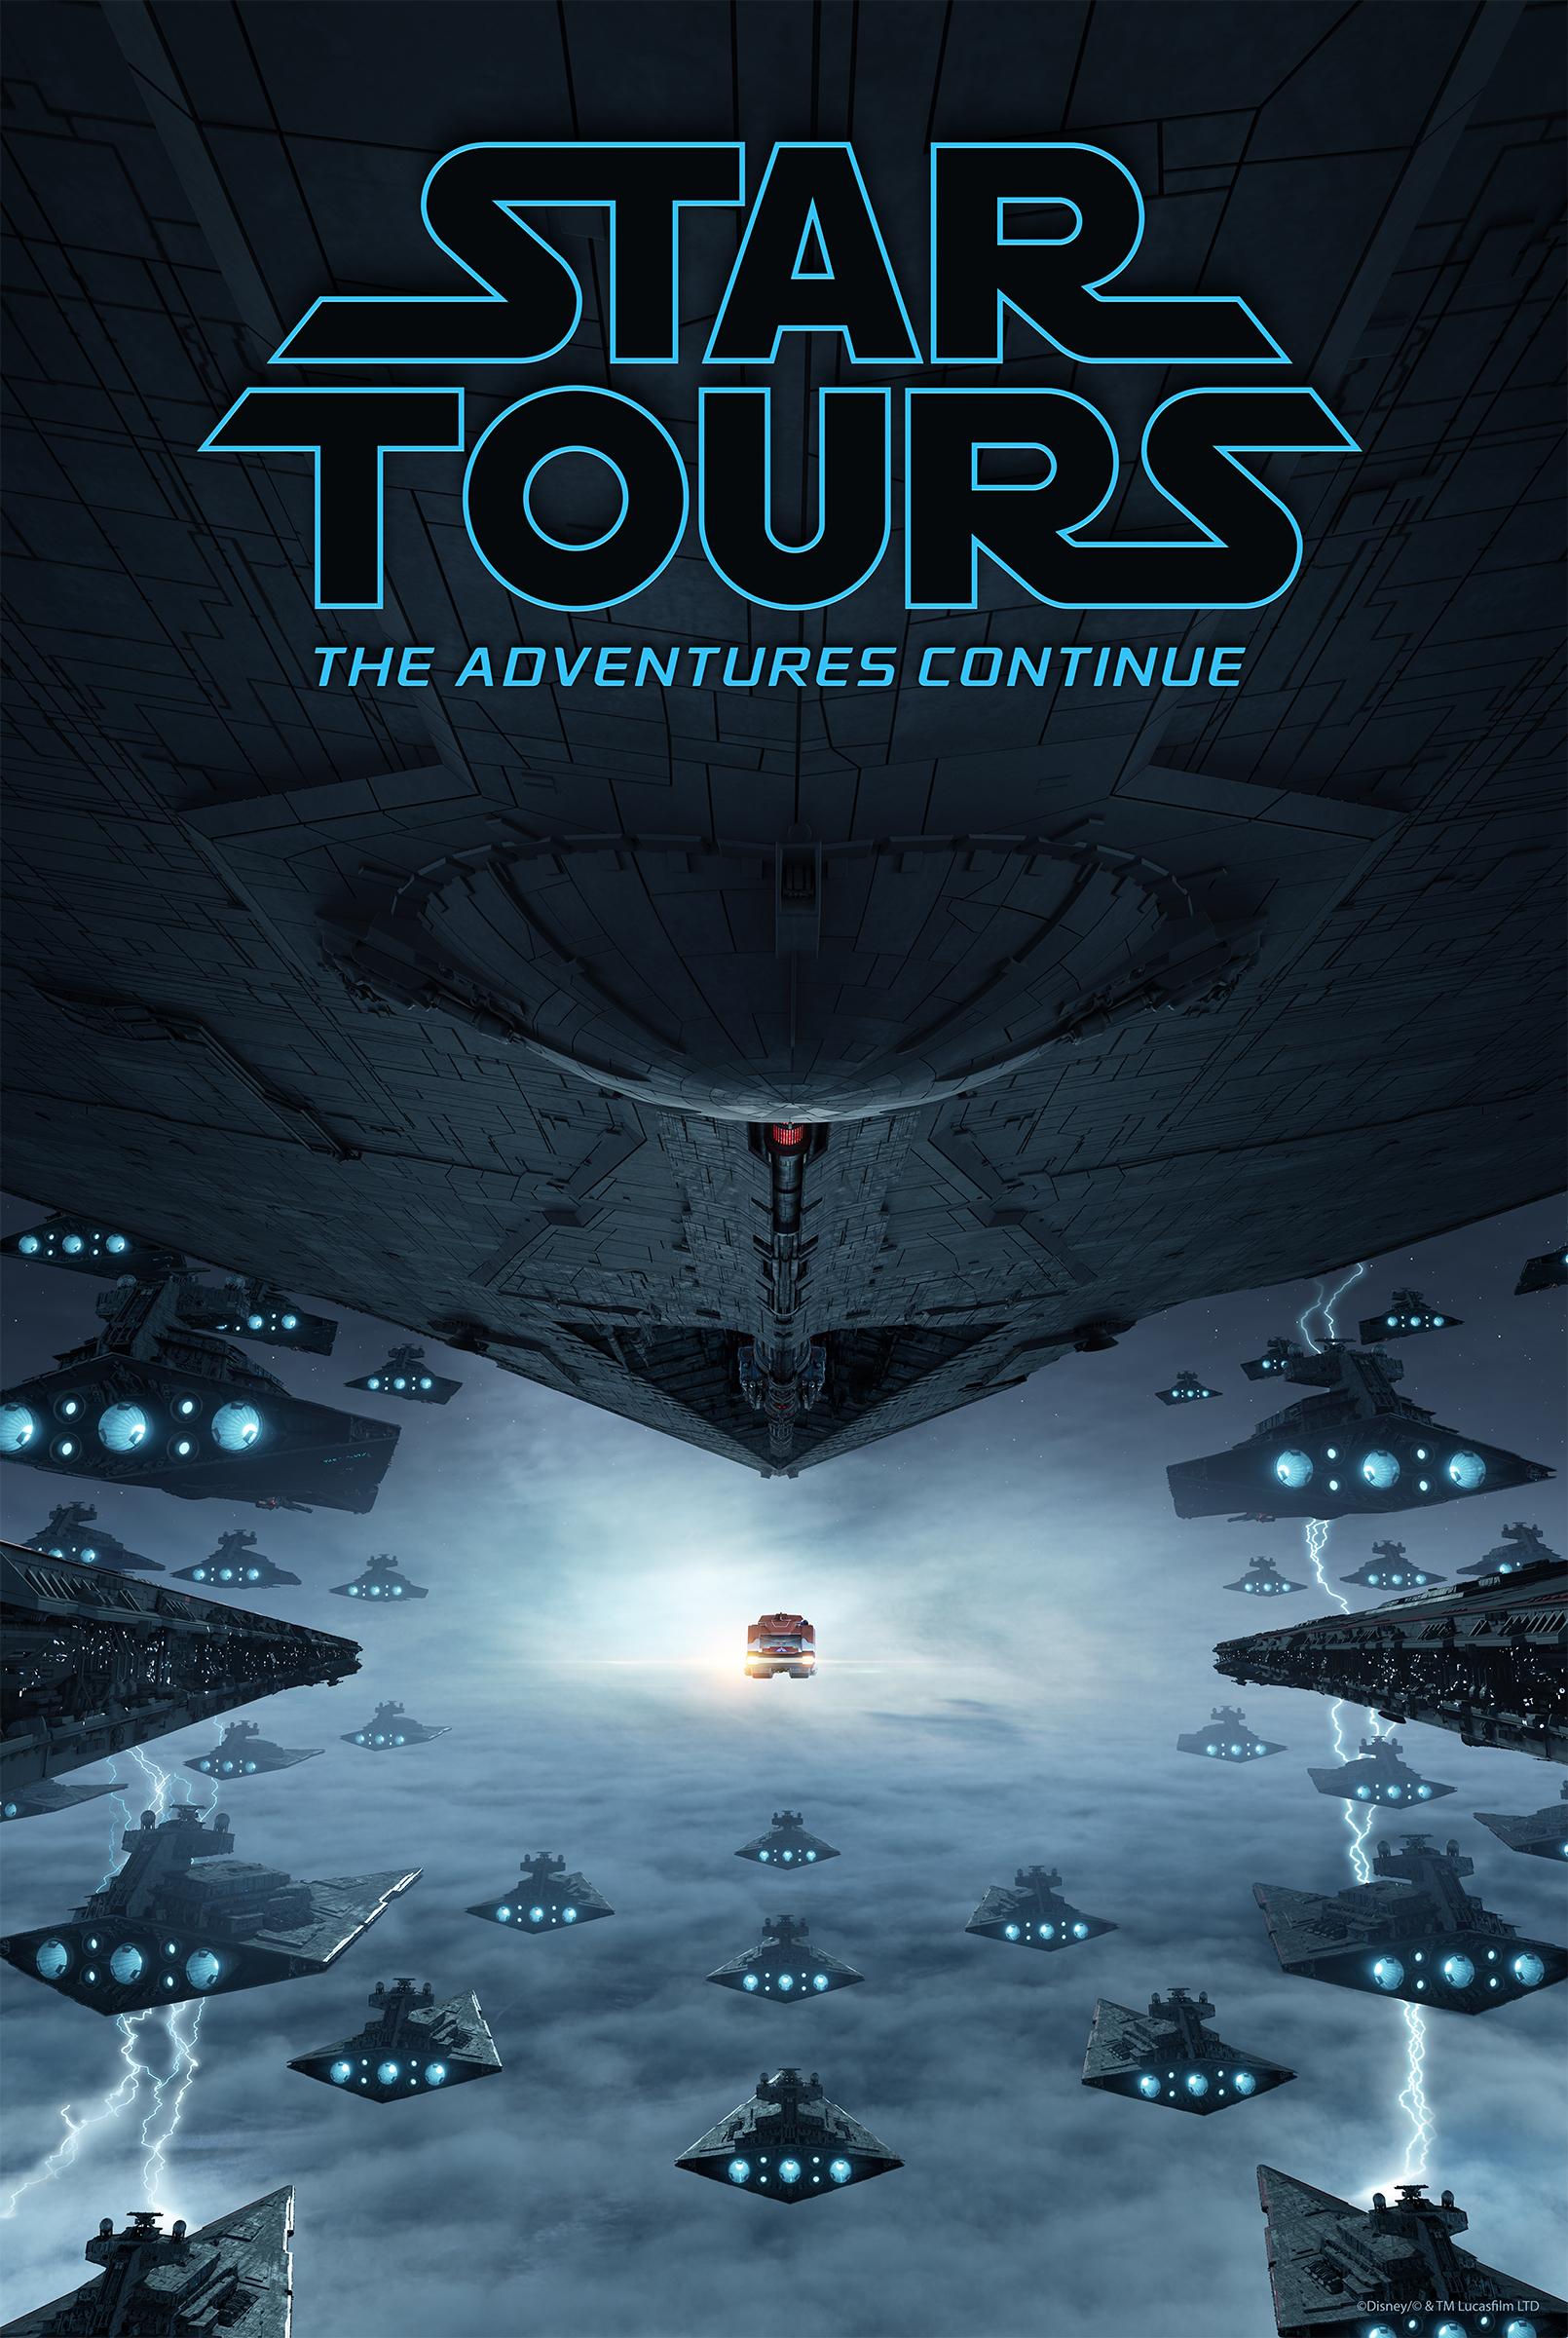 StarTours 2019 Attraction Poster copy